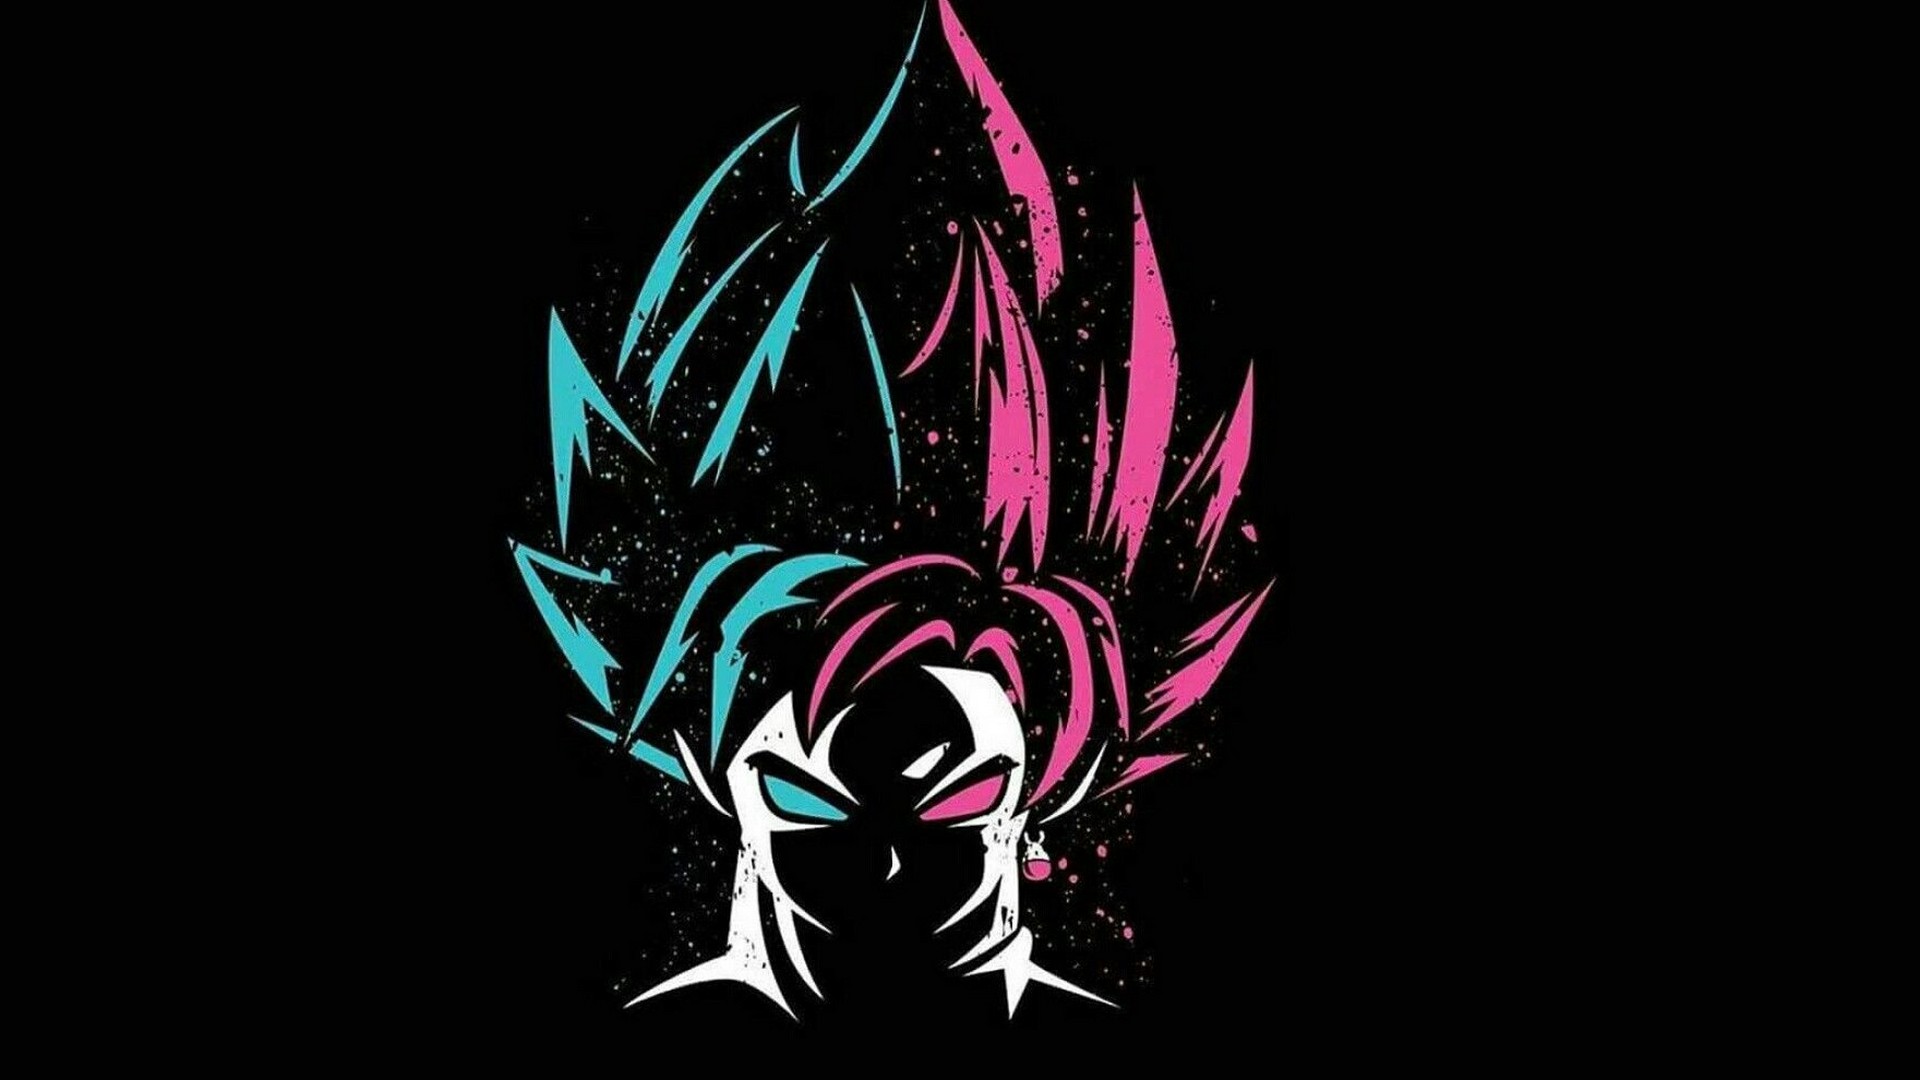 Black Goku Wallpaper with resolution 1920X1080 pixel. You can use this wallpaper as background for your desktop Computer Screensavers, Android or iPhone smartphones